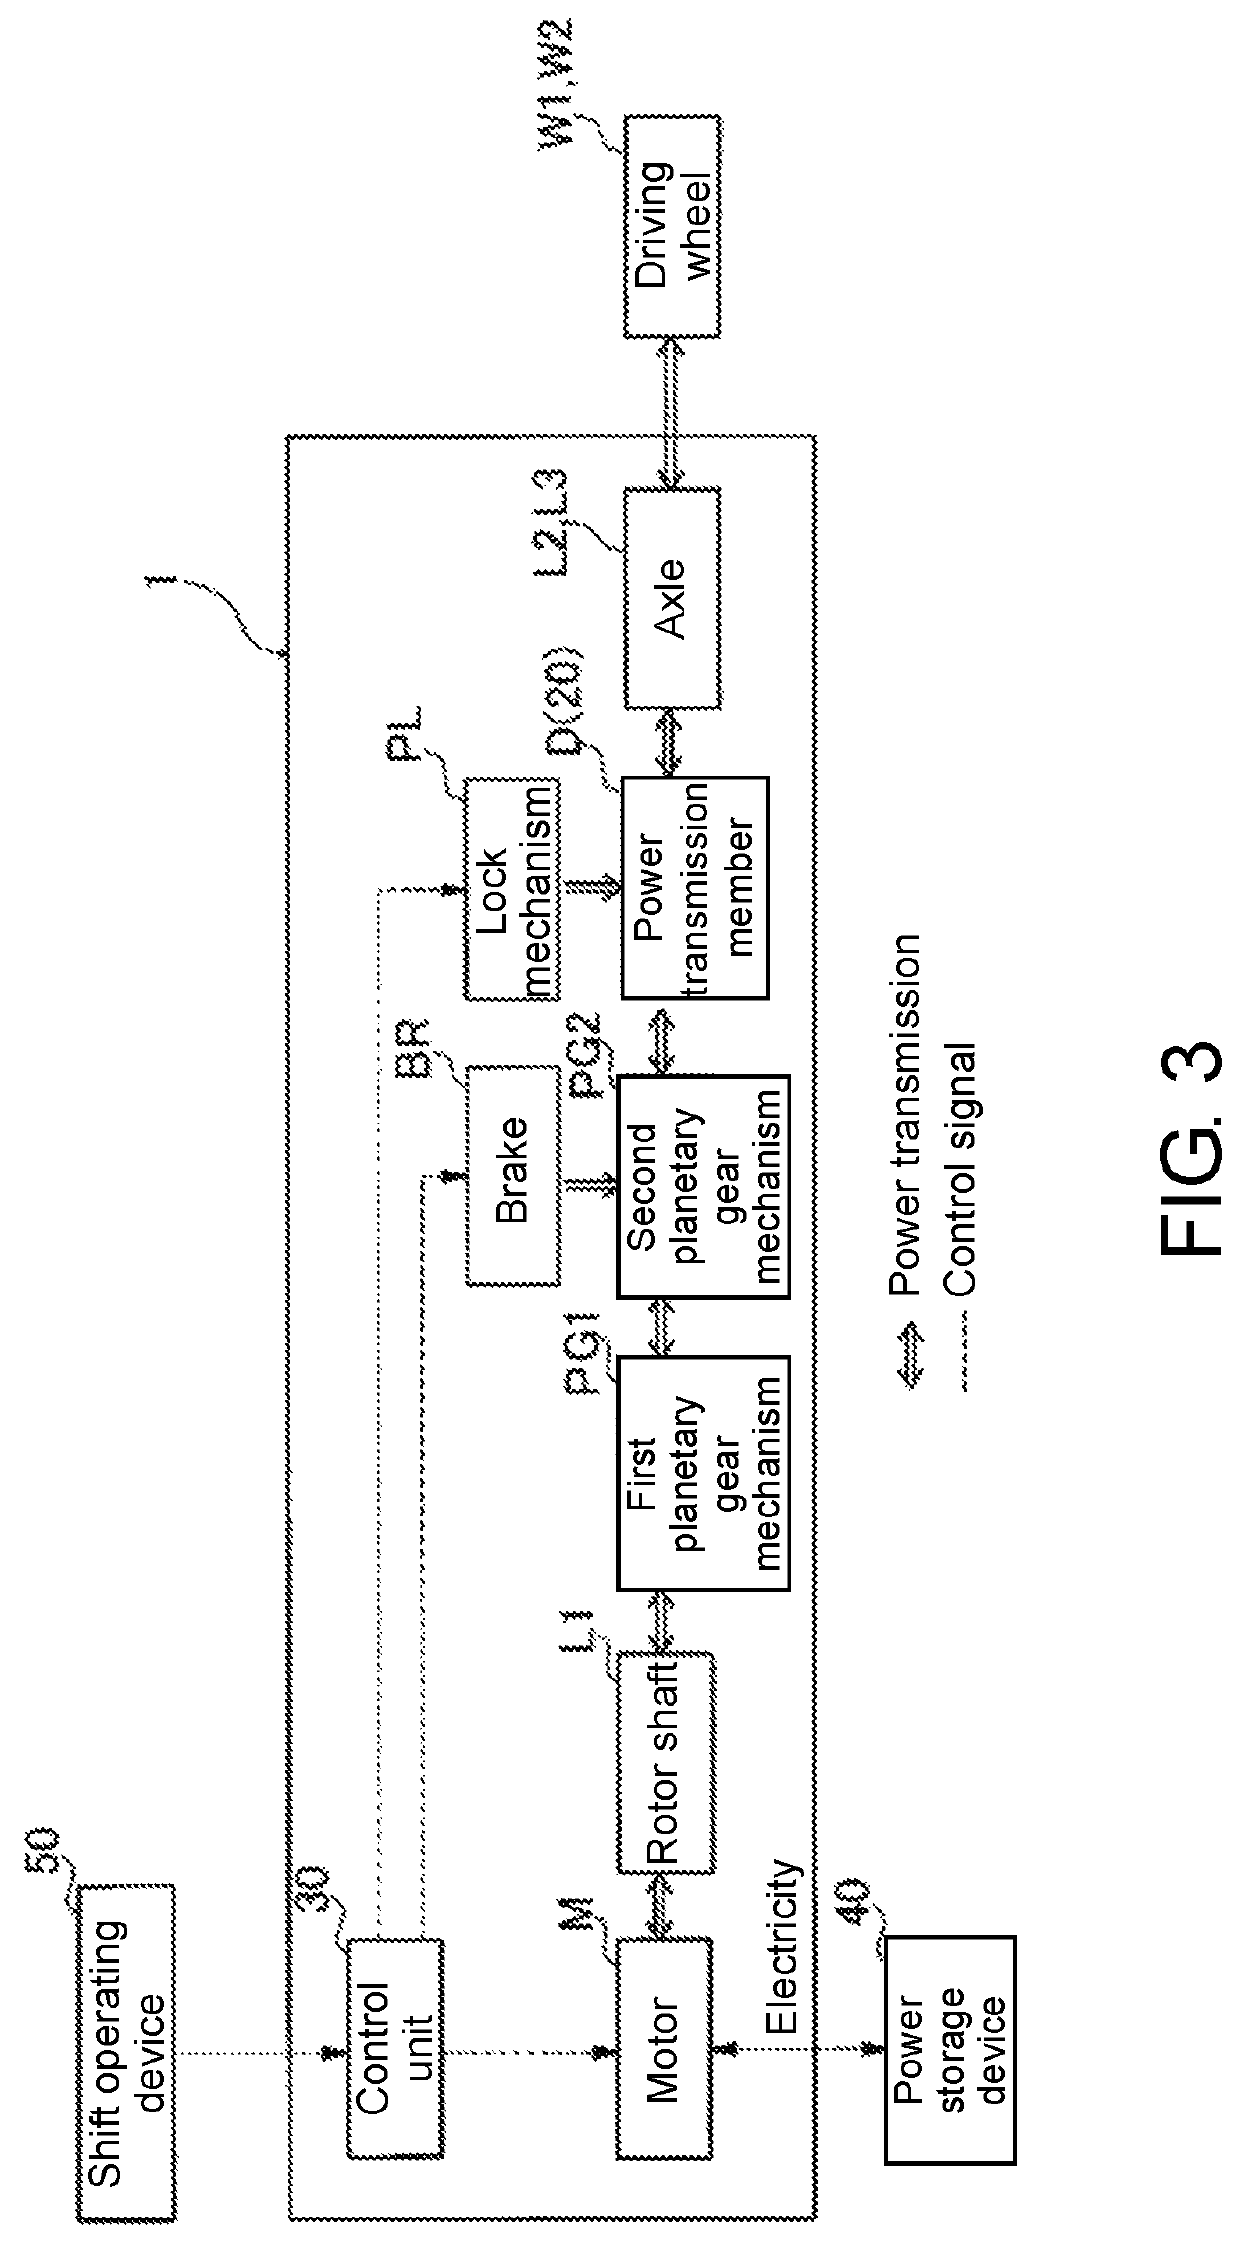 Driving device of vehicle